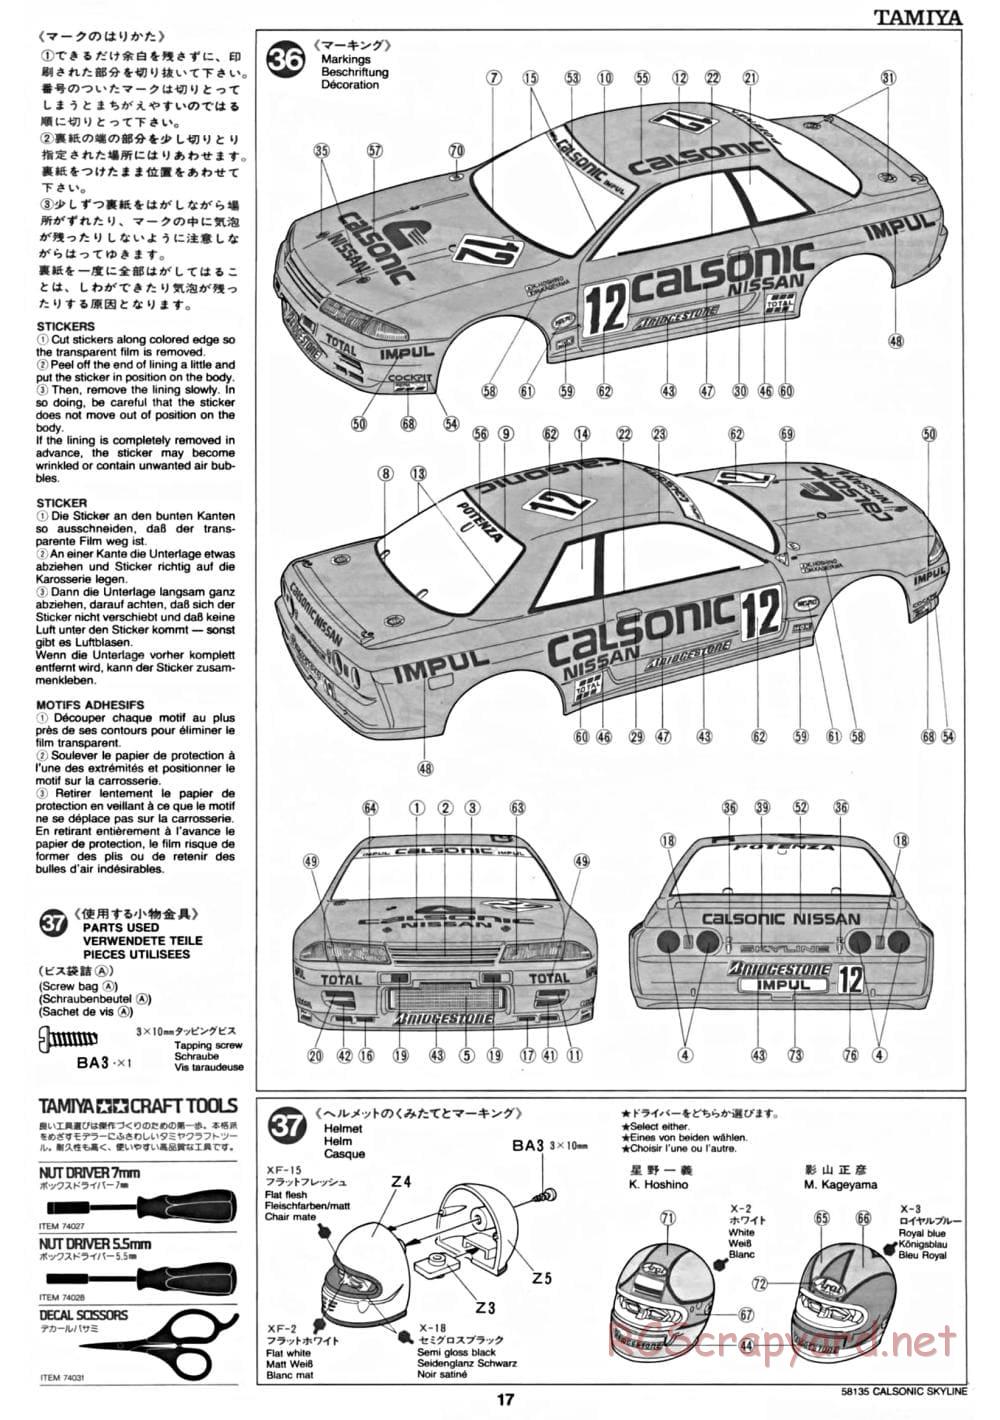 Tamiya - Calsonic Skyline GT-R Gr.A - TA-02 Chassis - Manual - Page 17